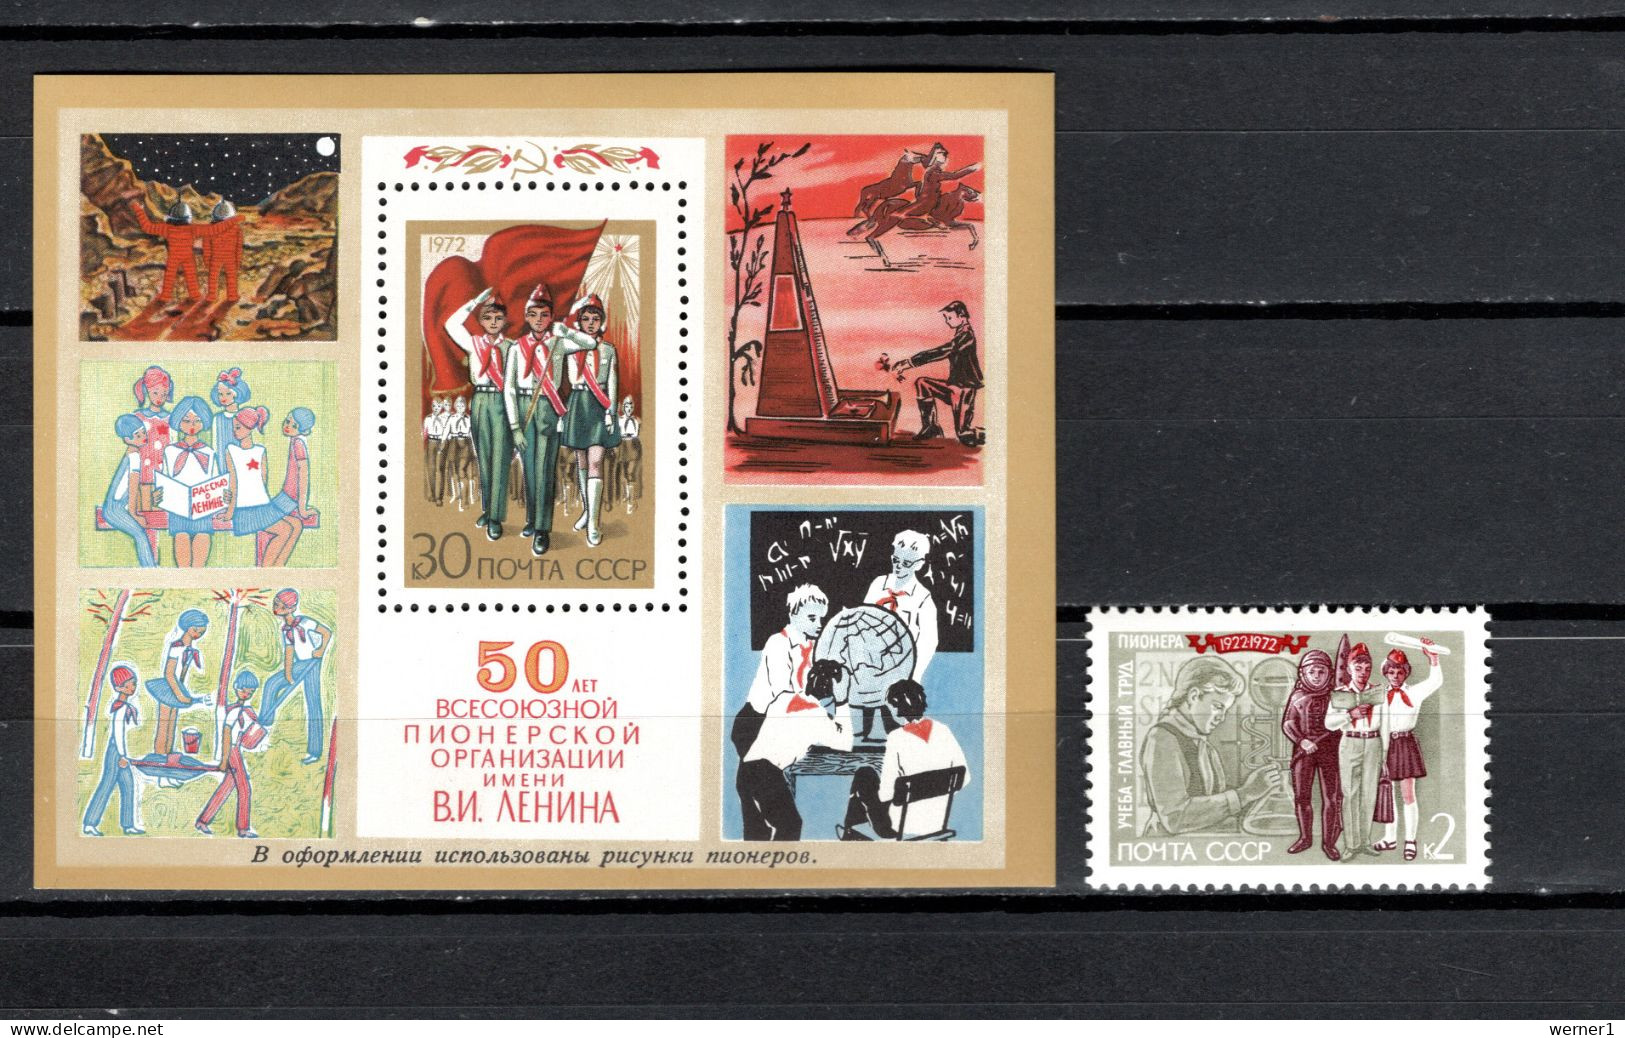 USSR Russia 1972 Space, Scouts Stamp + S/s MNH - Rusia & URSS